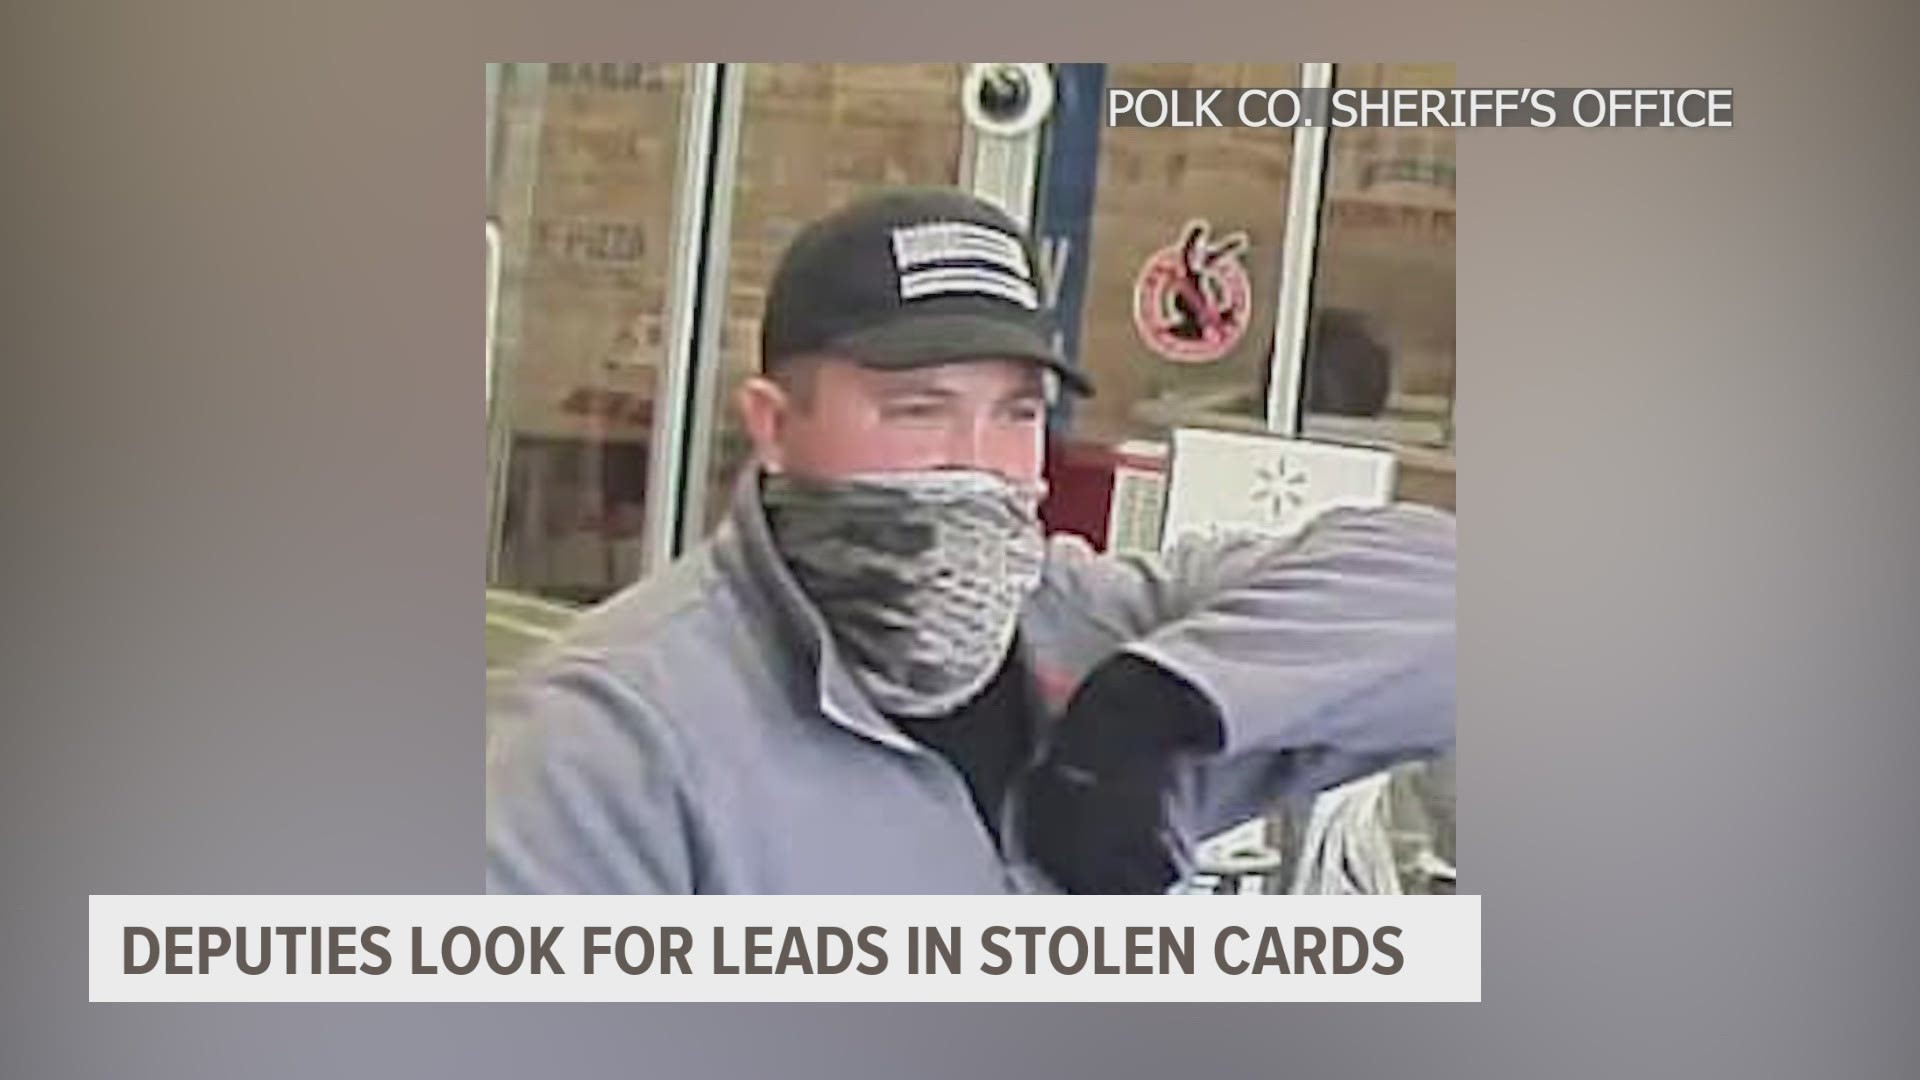 The Polk County Sheriff's Office posted to Facebook asking for the public's help in identifying suspects who attempted to use stolen credit cards in the area.